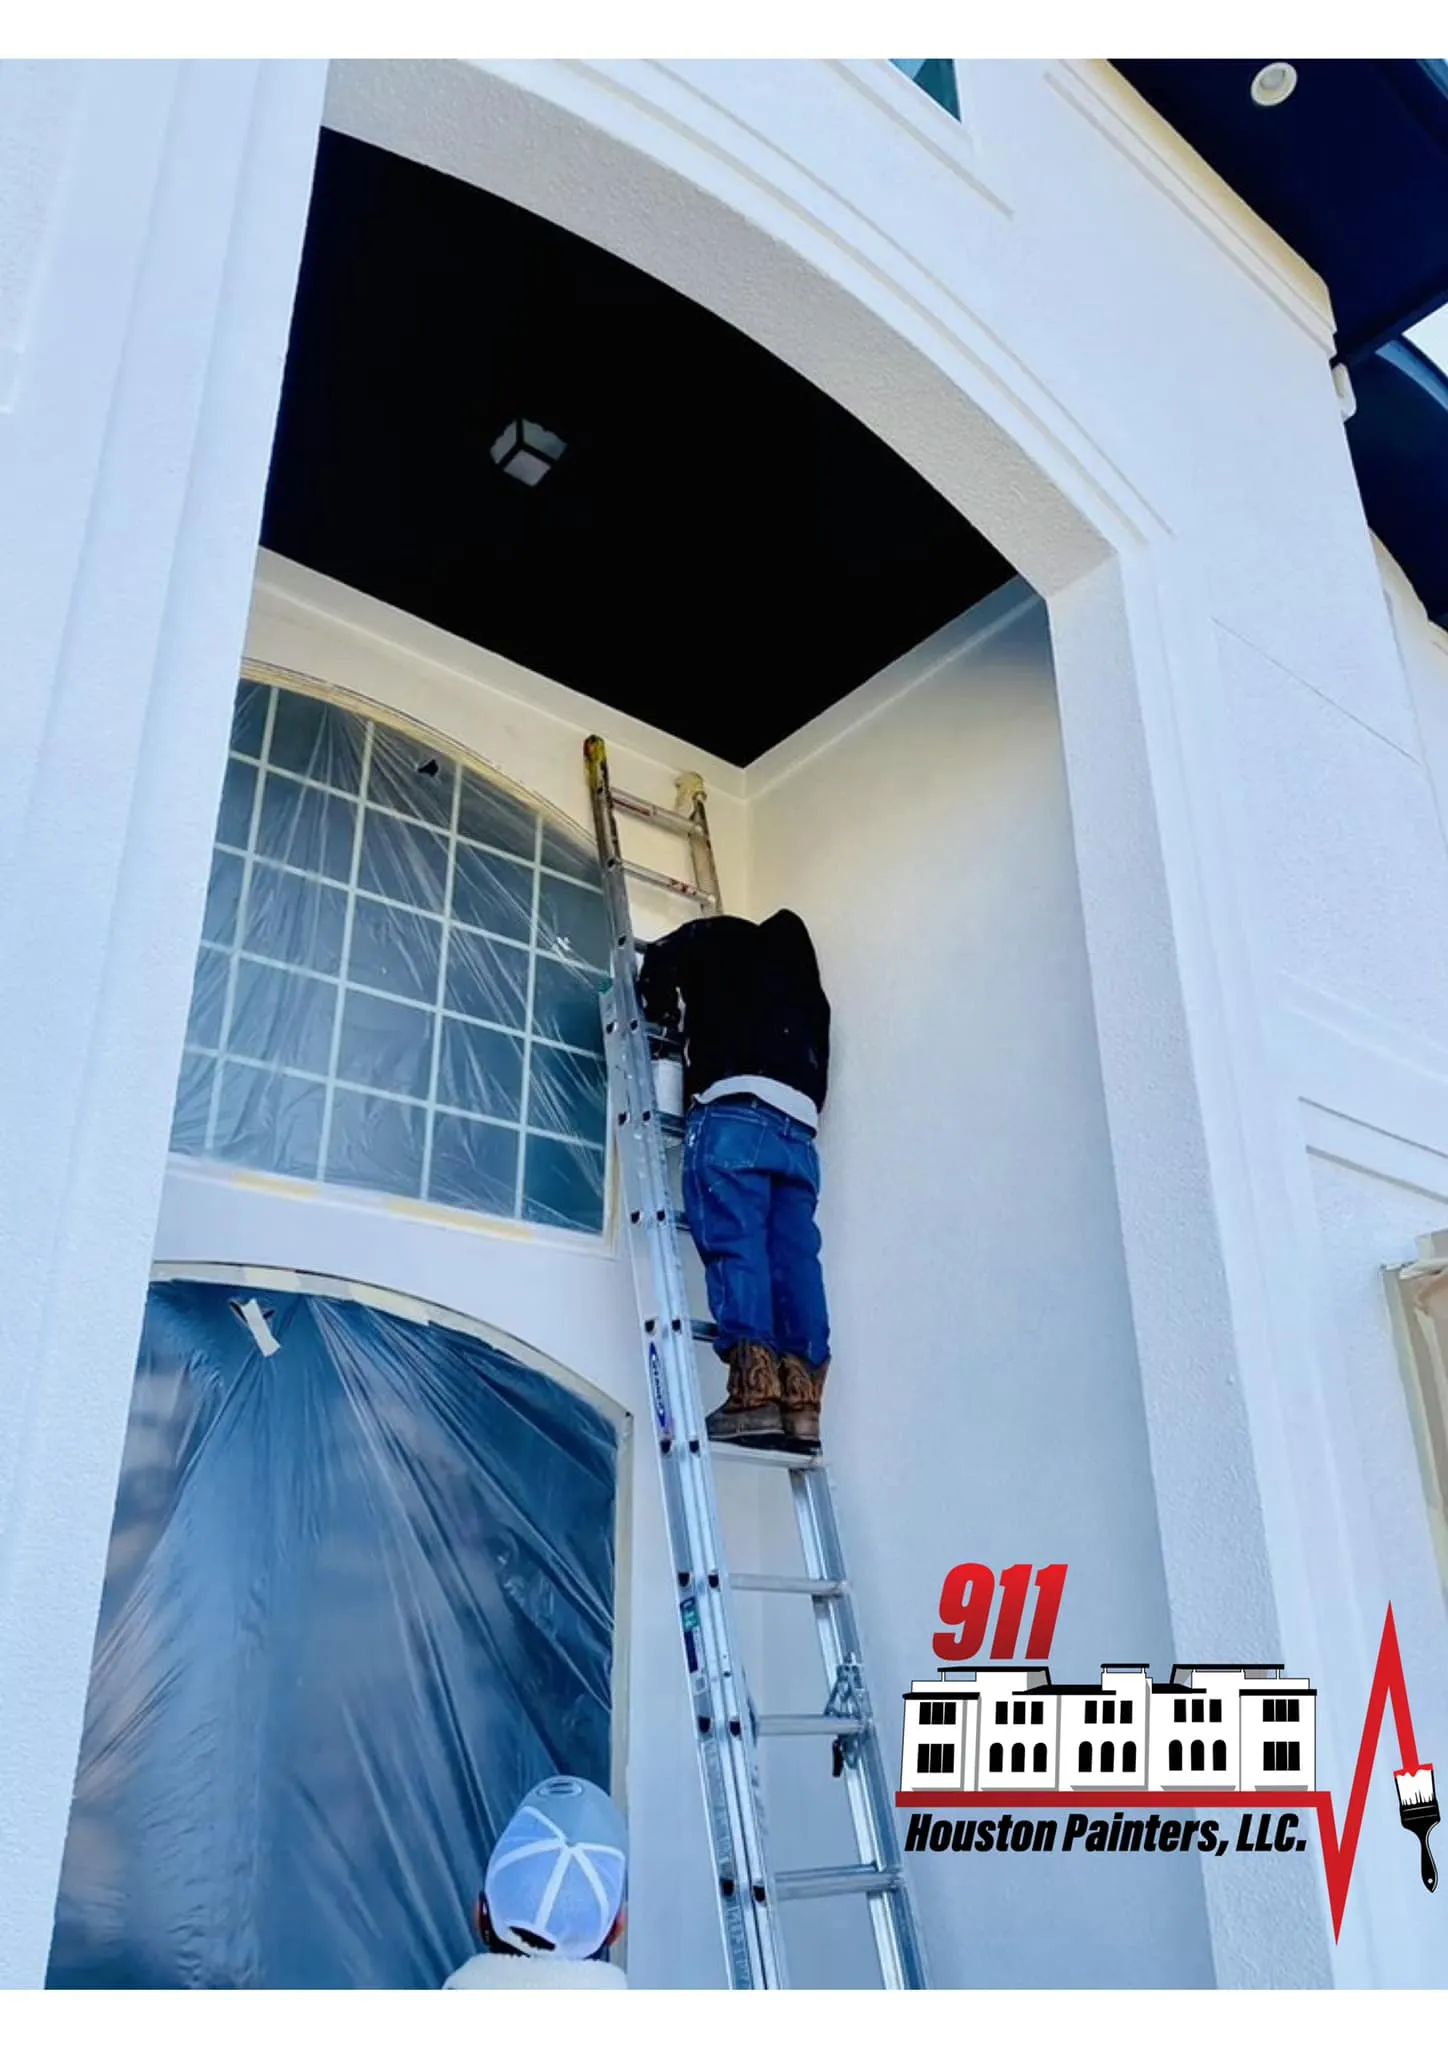 All Photos for 911 Houston Painters, LLC in Houston, TX